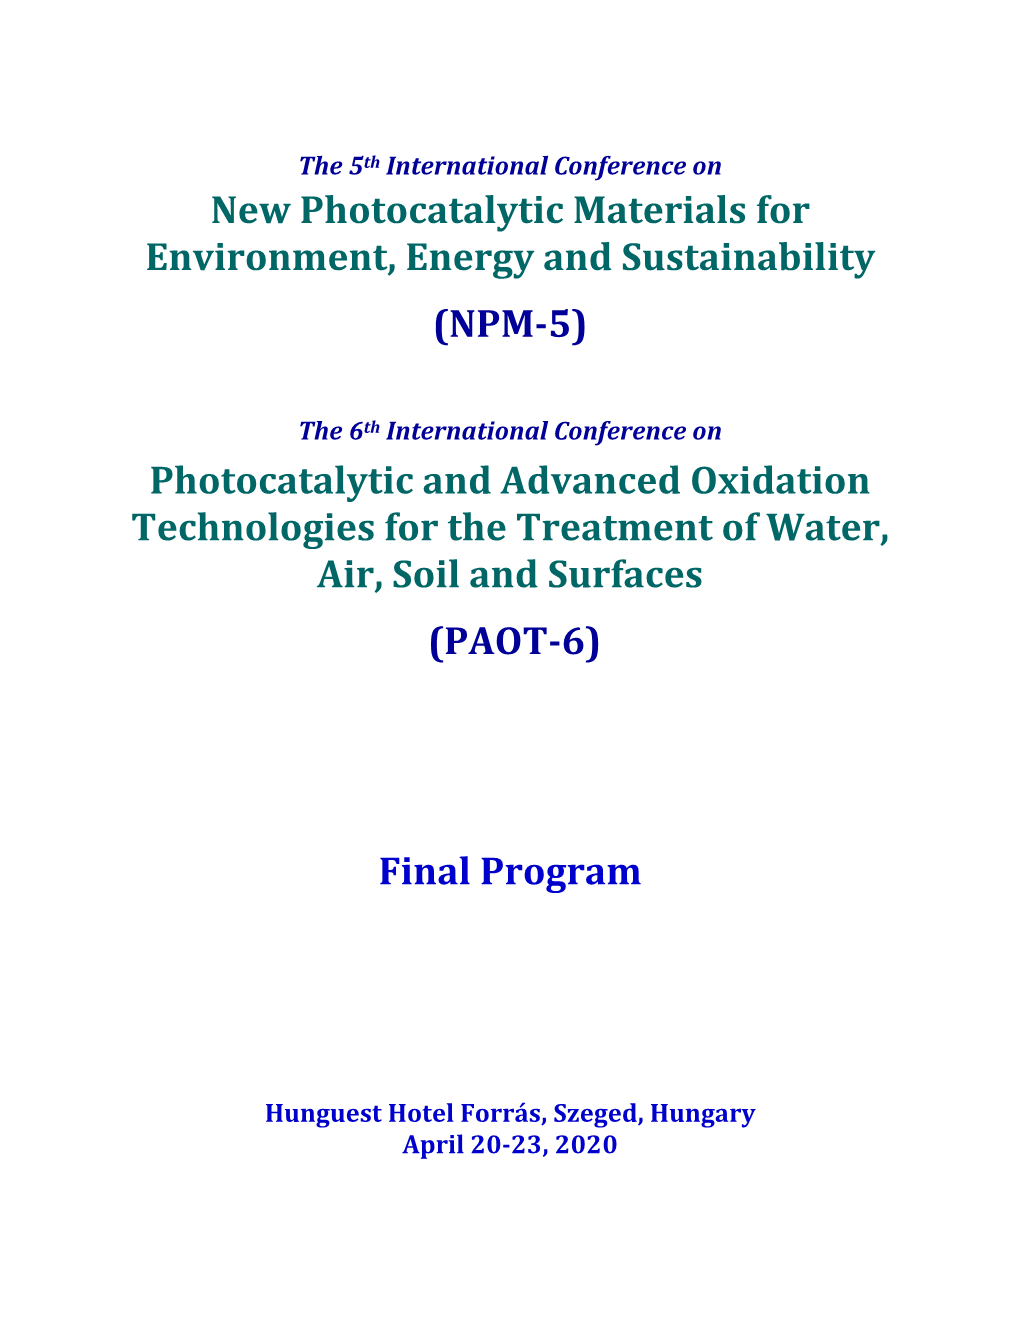 Photocatalytic and Advanced Oxidation Technologies for the Treatment of Water, Air, Soil and Surfaces (PAOT-6)